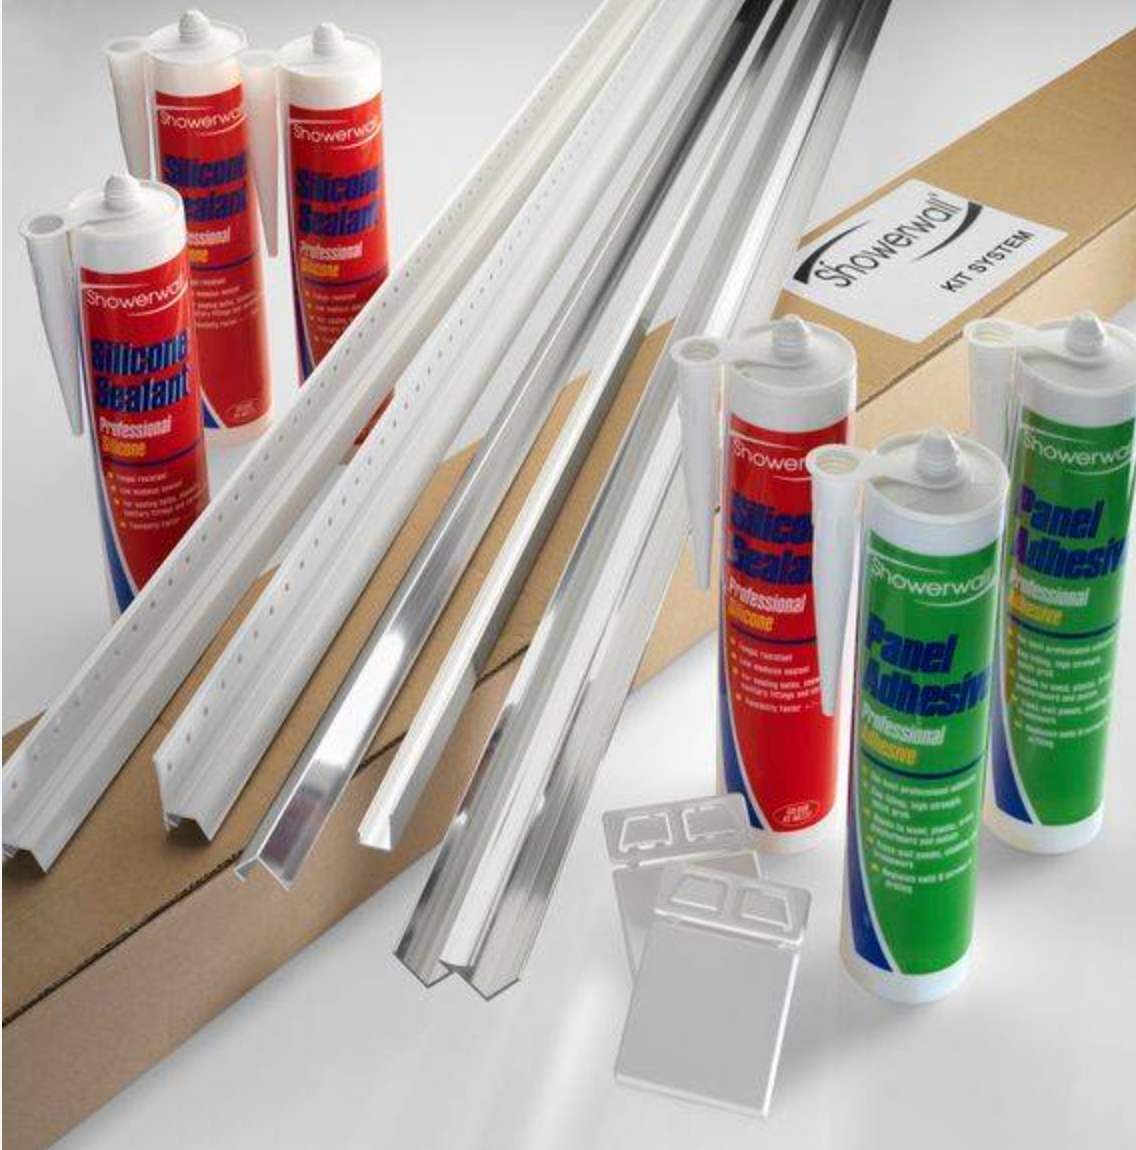 Showerwall Laminate Installation Kit - White Gloss trim with clear or White sealant